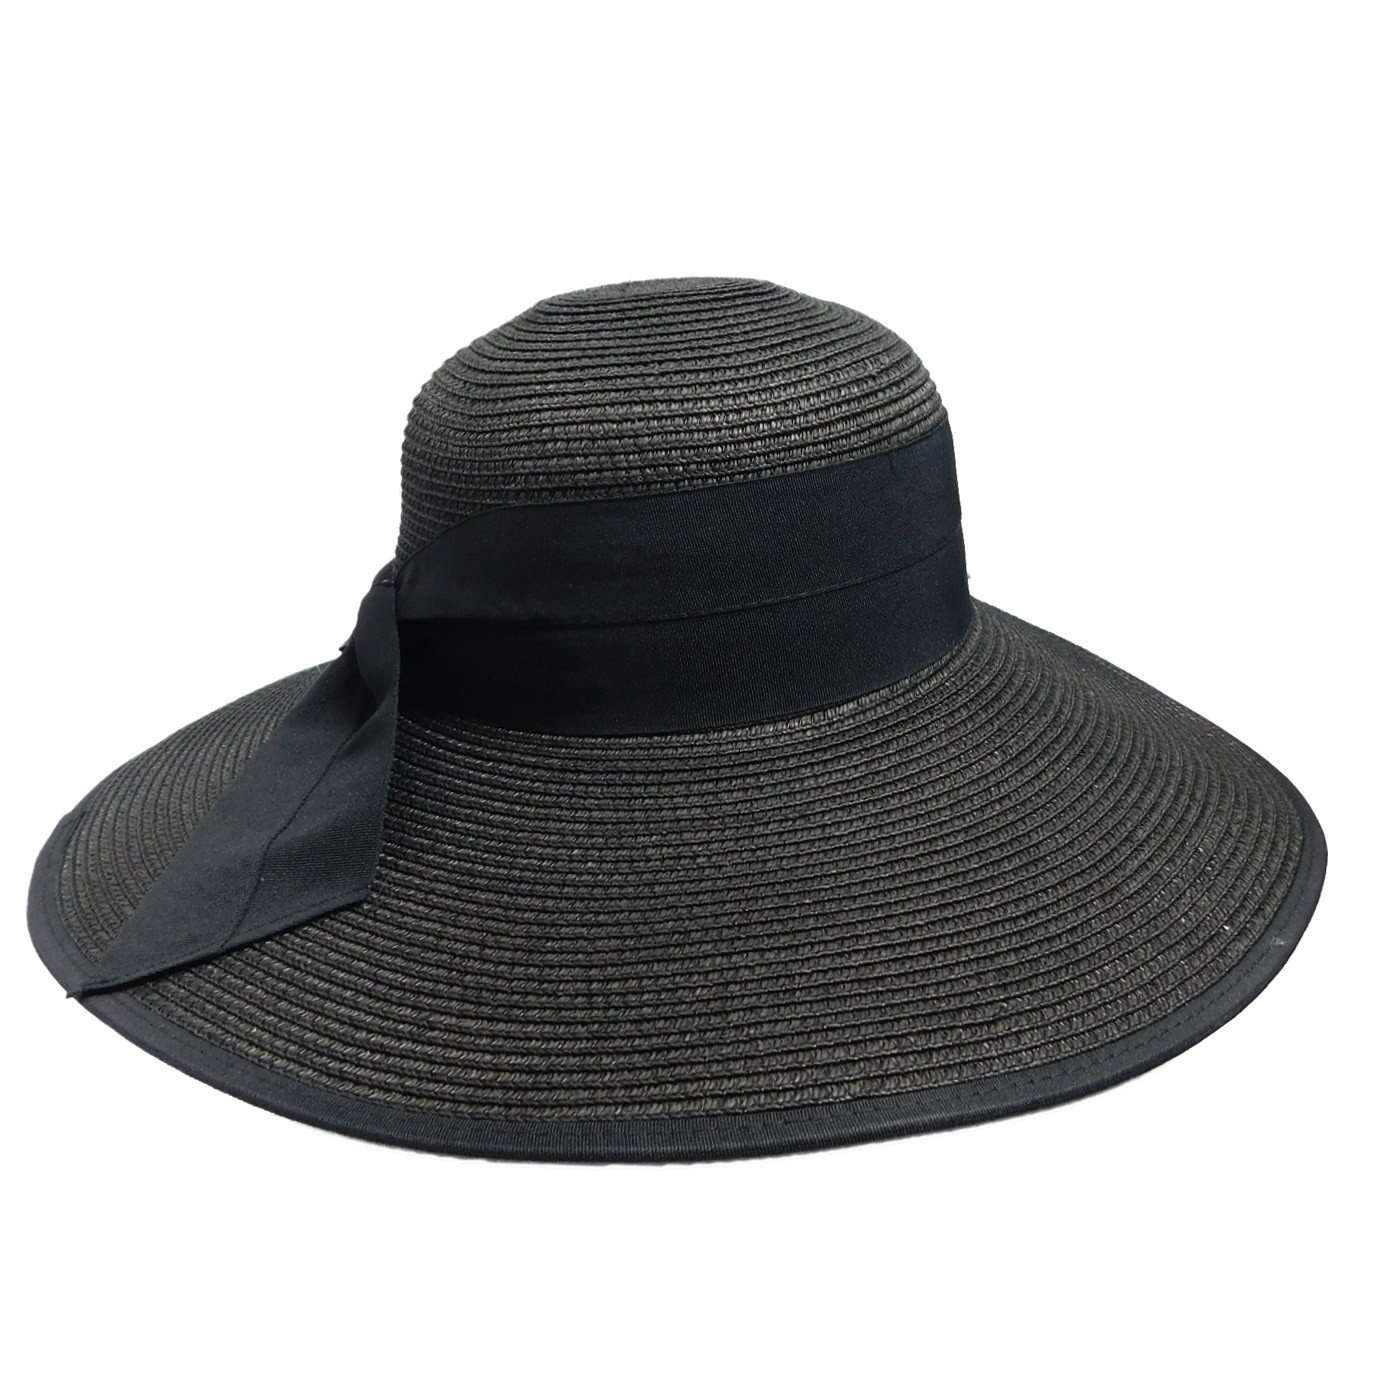 Large Sun Hat with Double Ribbon Band Wide Brim Hat Jeanne Simmons WSPS468BK Black  